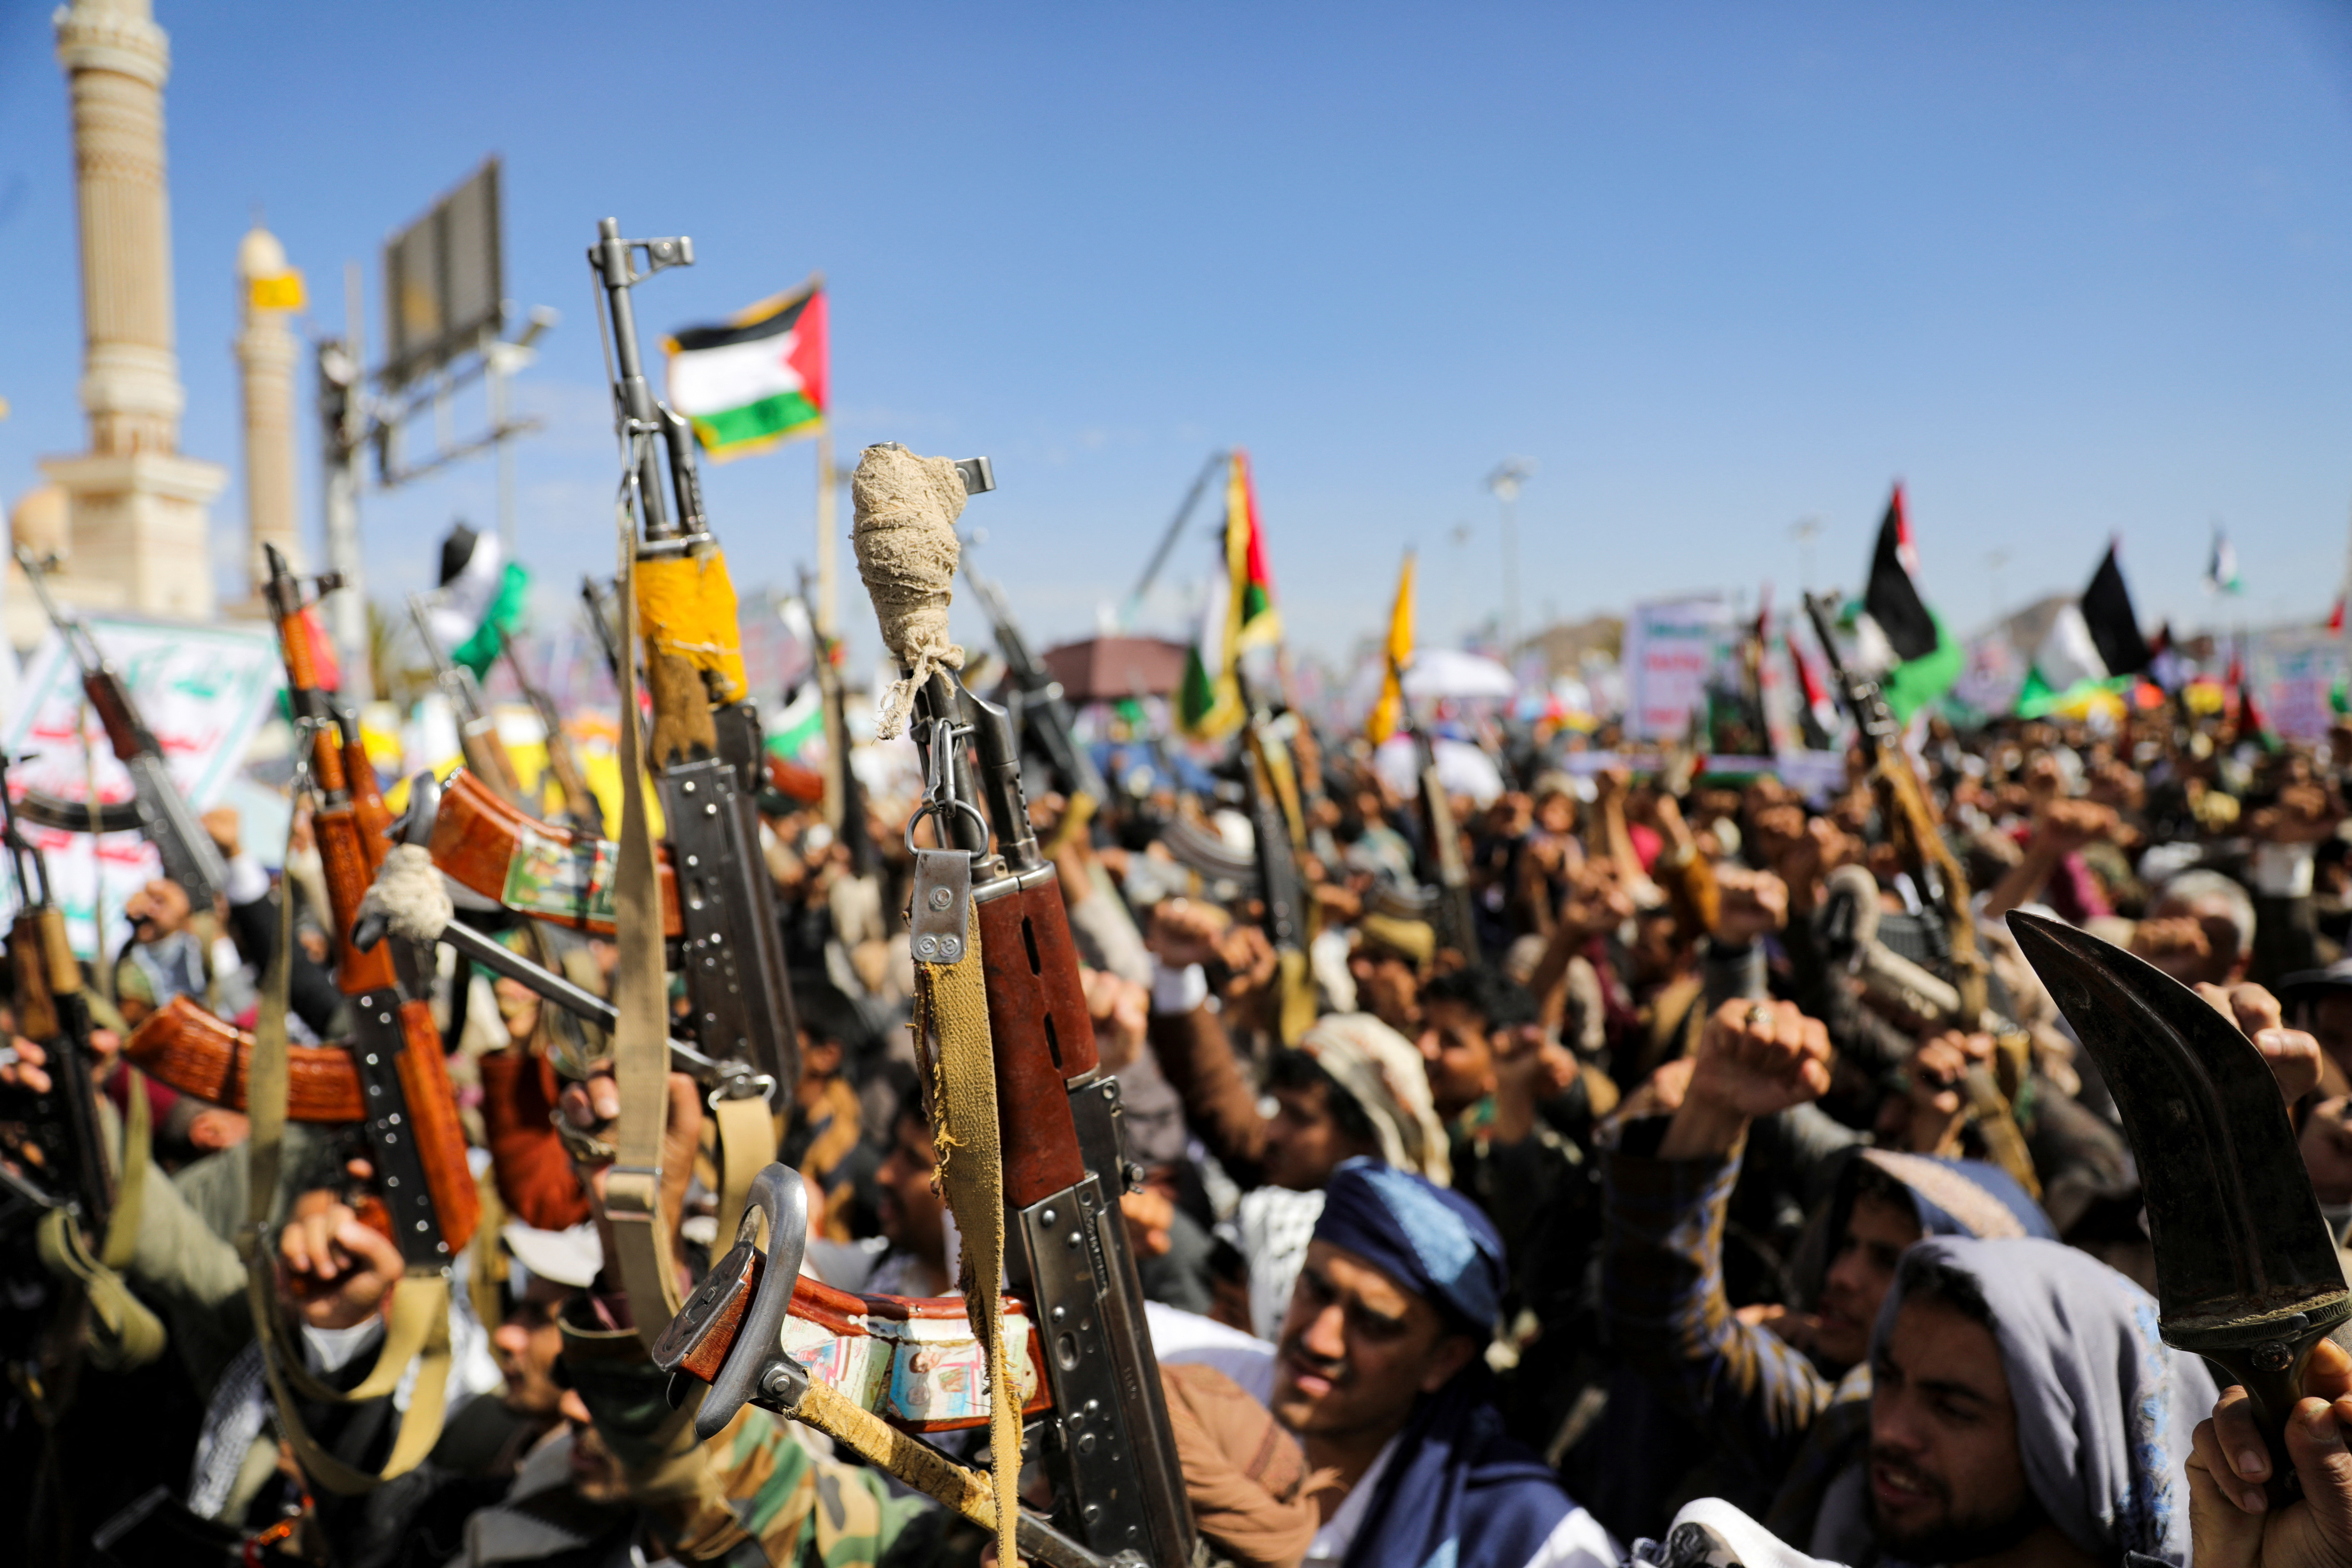 Protestors rally in support of Palestinians in the Gaza Strip, in Sanaa